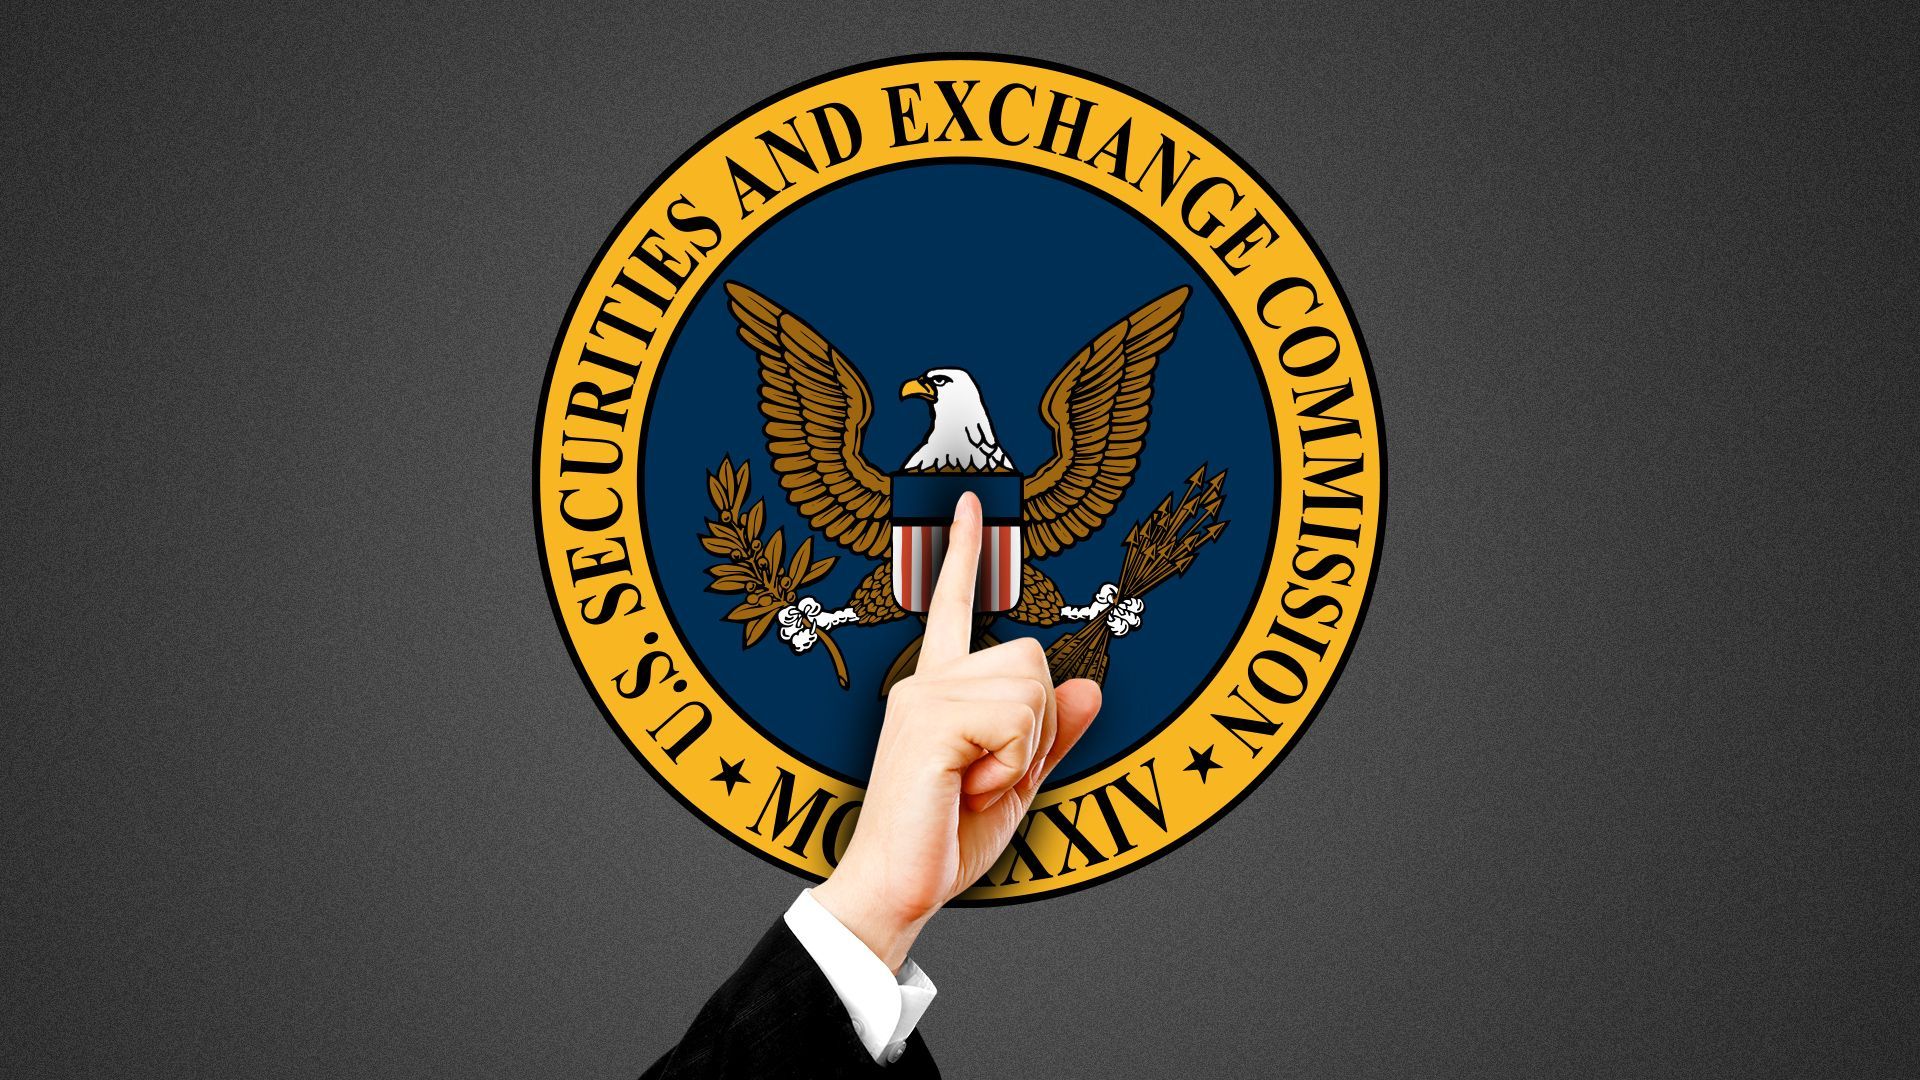 Illustration of the SEC logo with a hand in front making a "shushing" hand motion.